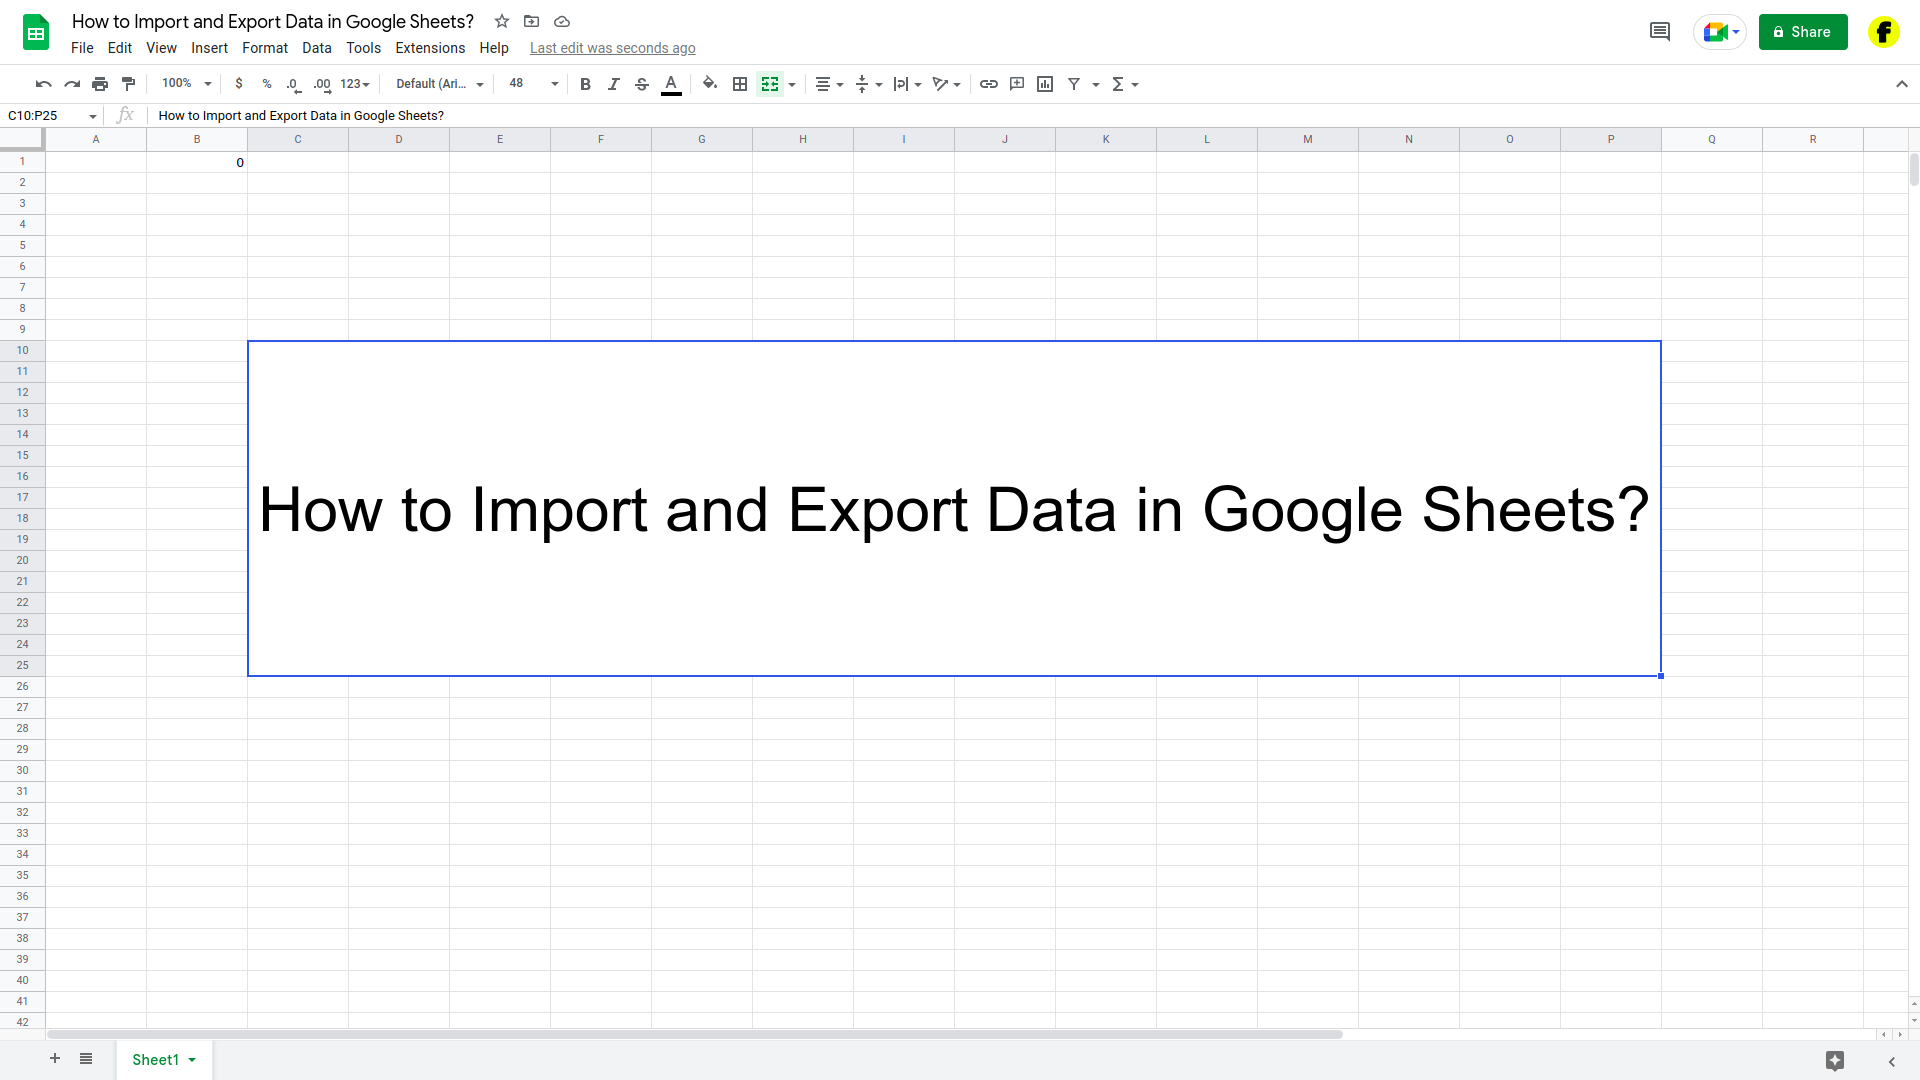 How to Import and Export Data in Google Sheets